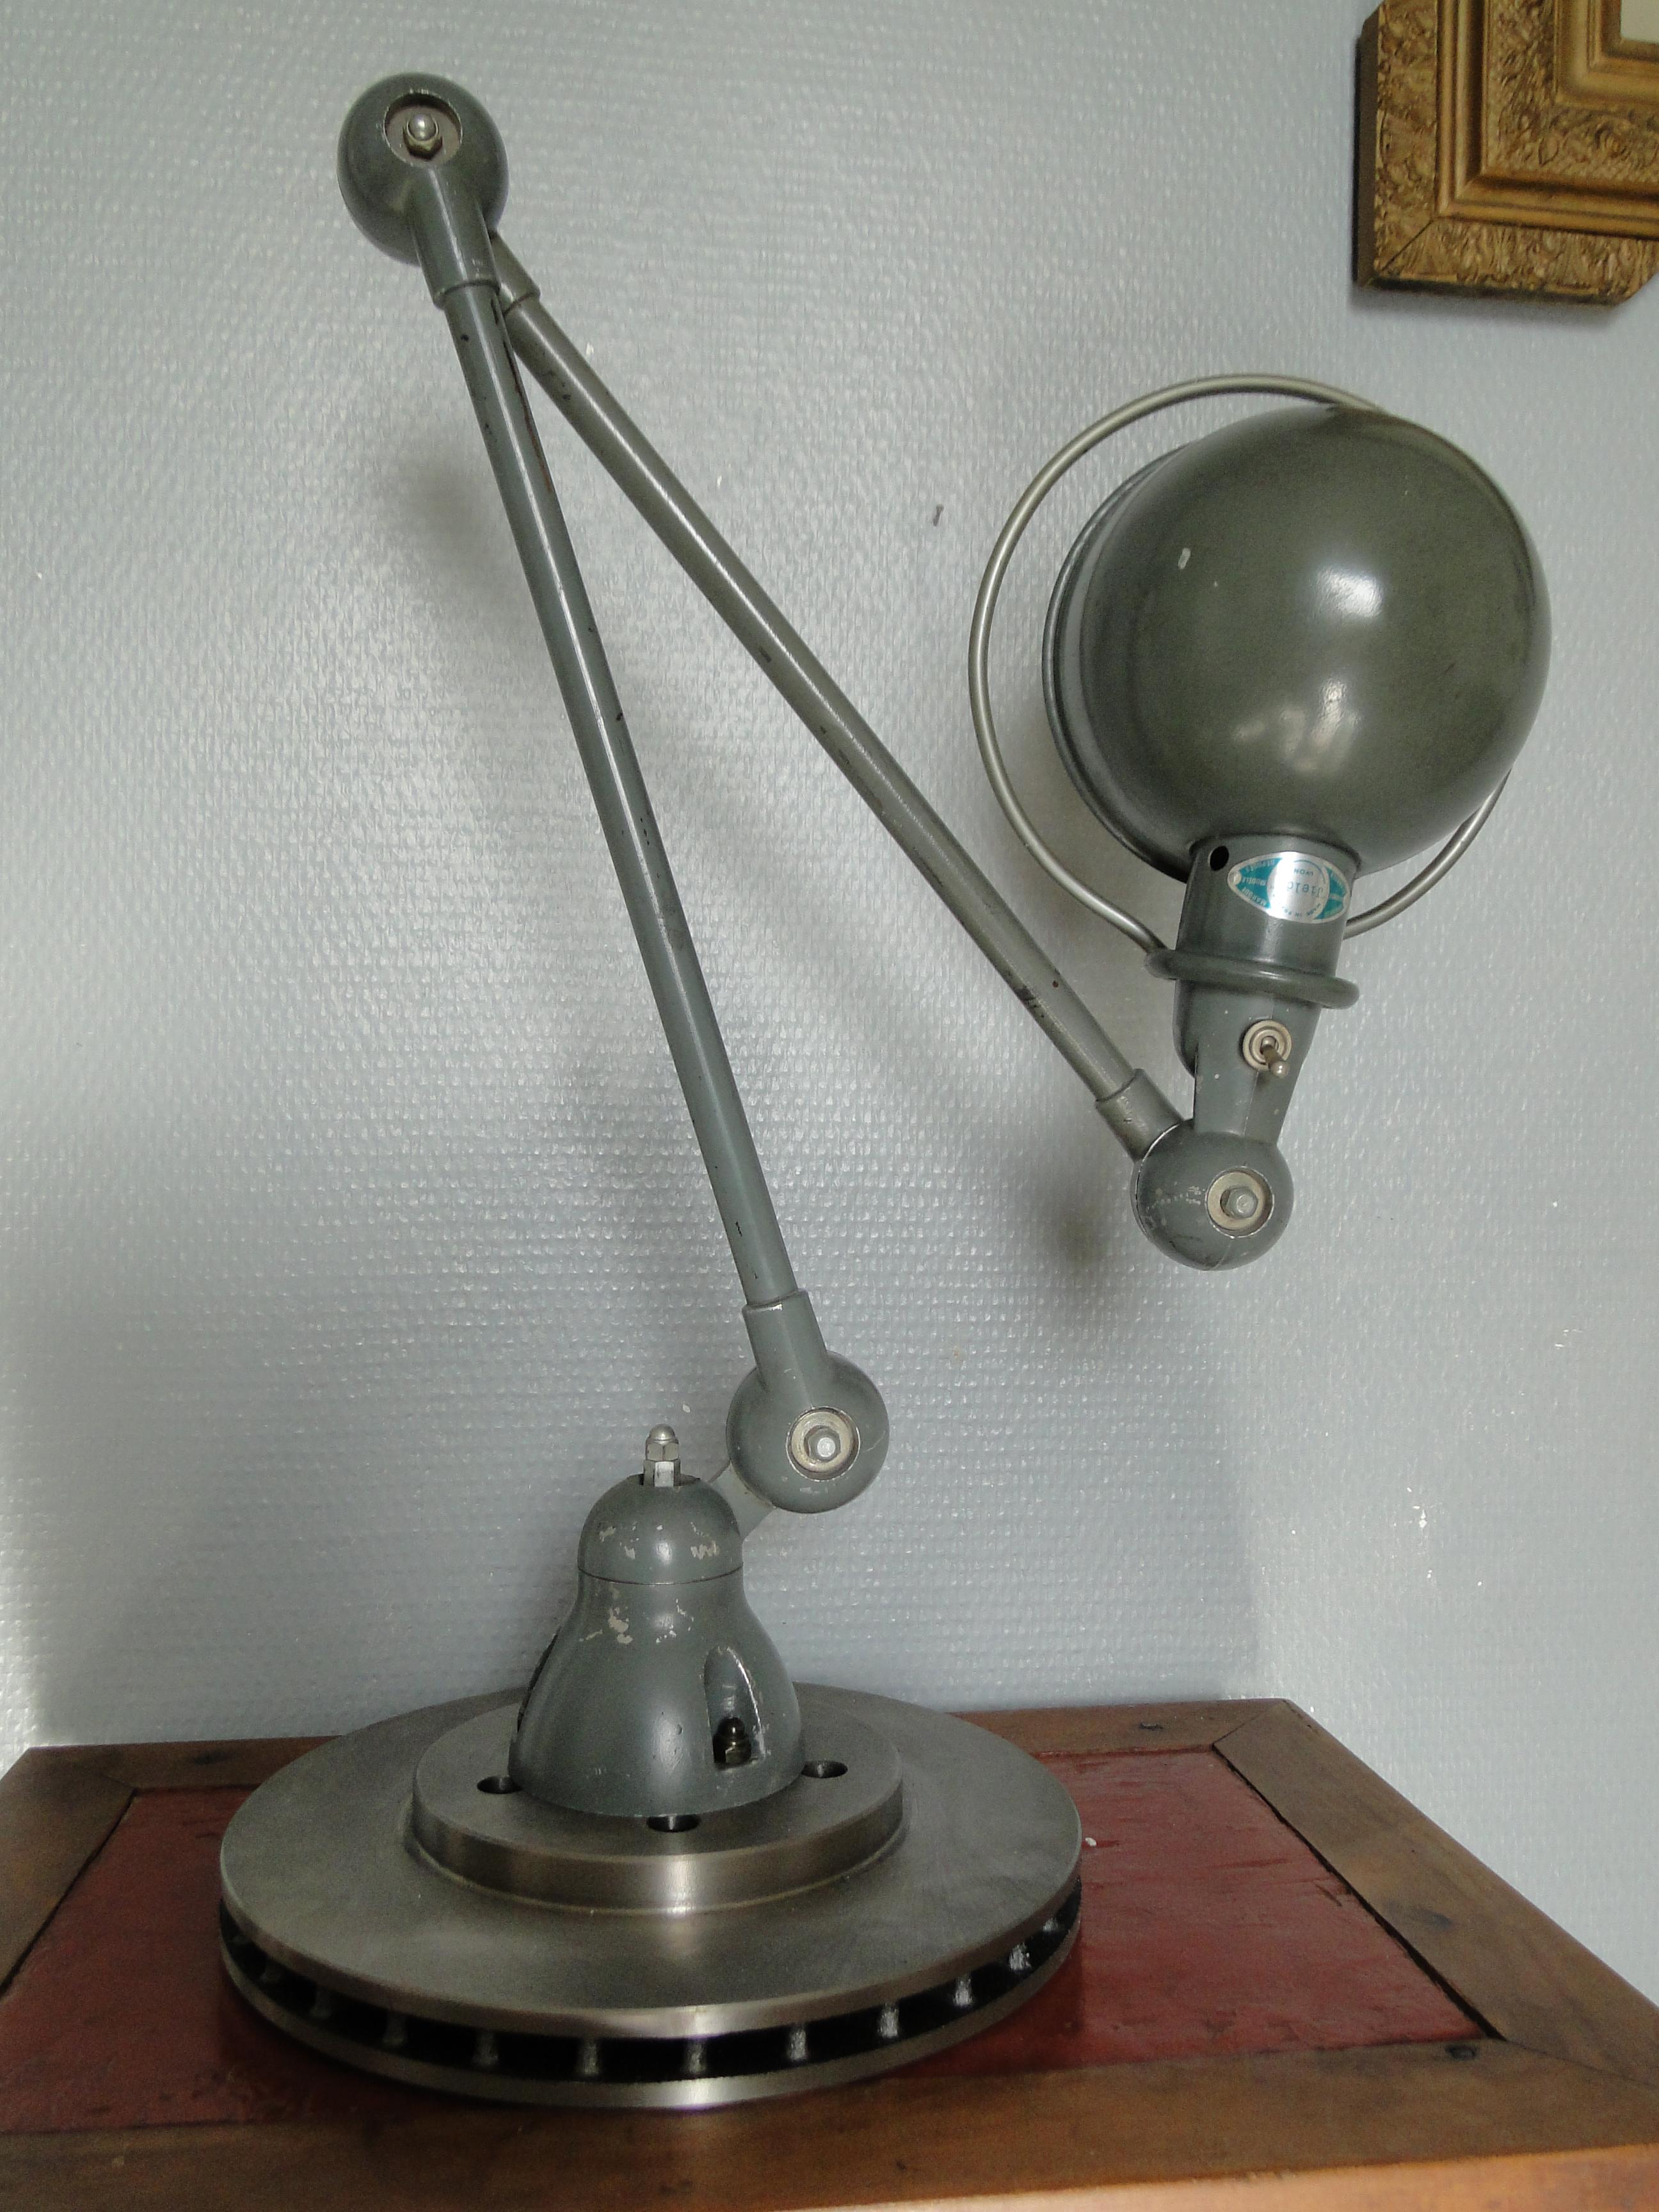 2 armed JIELDE lamp reading lamp French industrial lamp

Designed by Jean-Louis Domecq in the early 1950s

ORIGINAL Jielde lamp

The lamp stands on a new ventilated brake disc, which guarantees the best stability

The electrification has